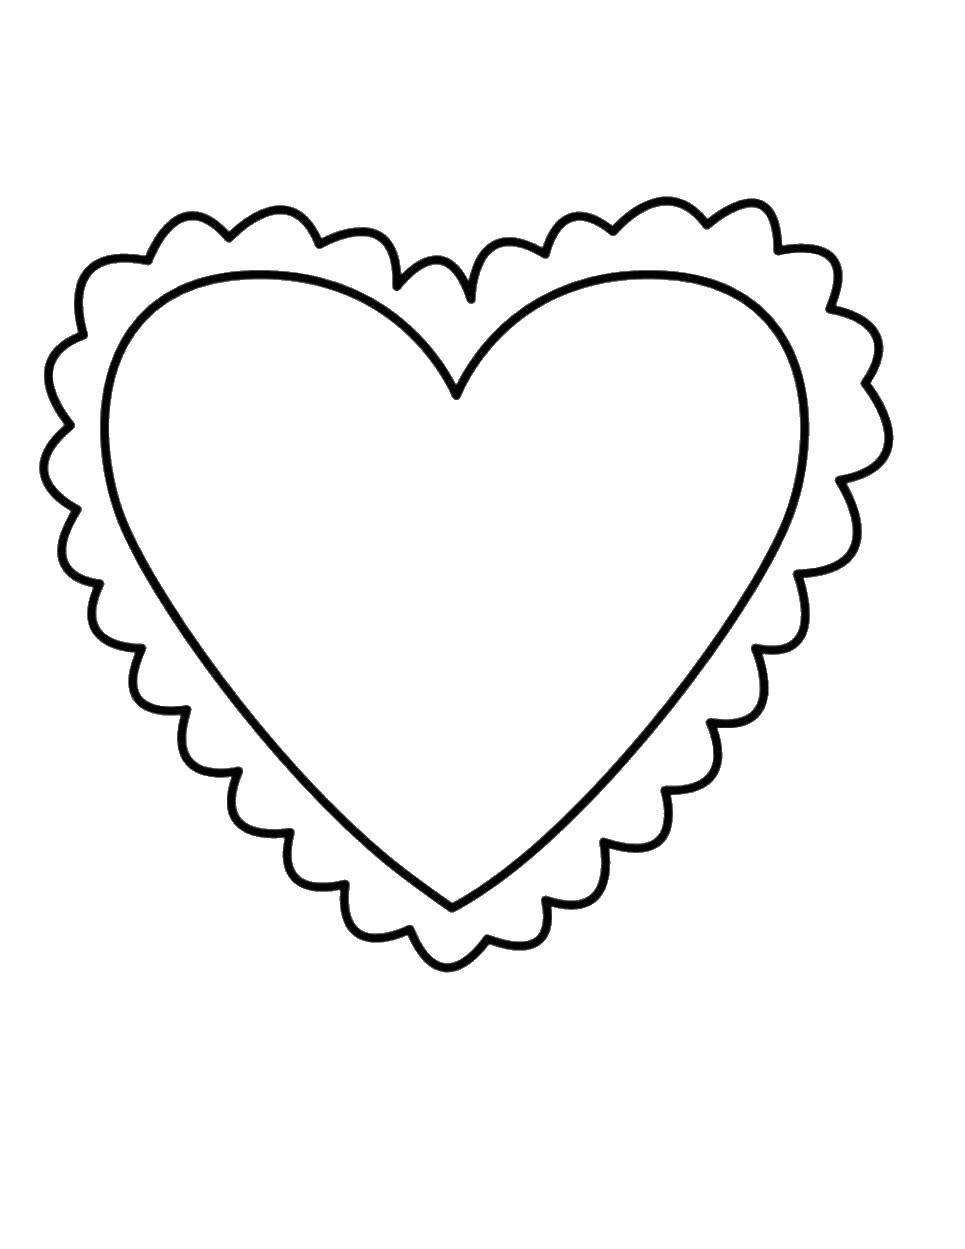 Coloring Heart. Category I love you. Tags:  hearts, love, overlay.